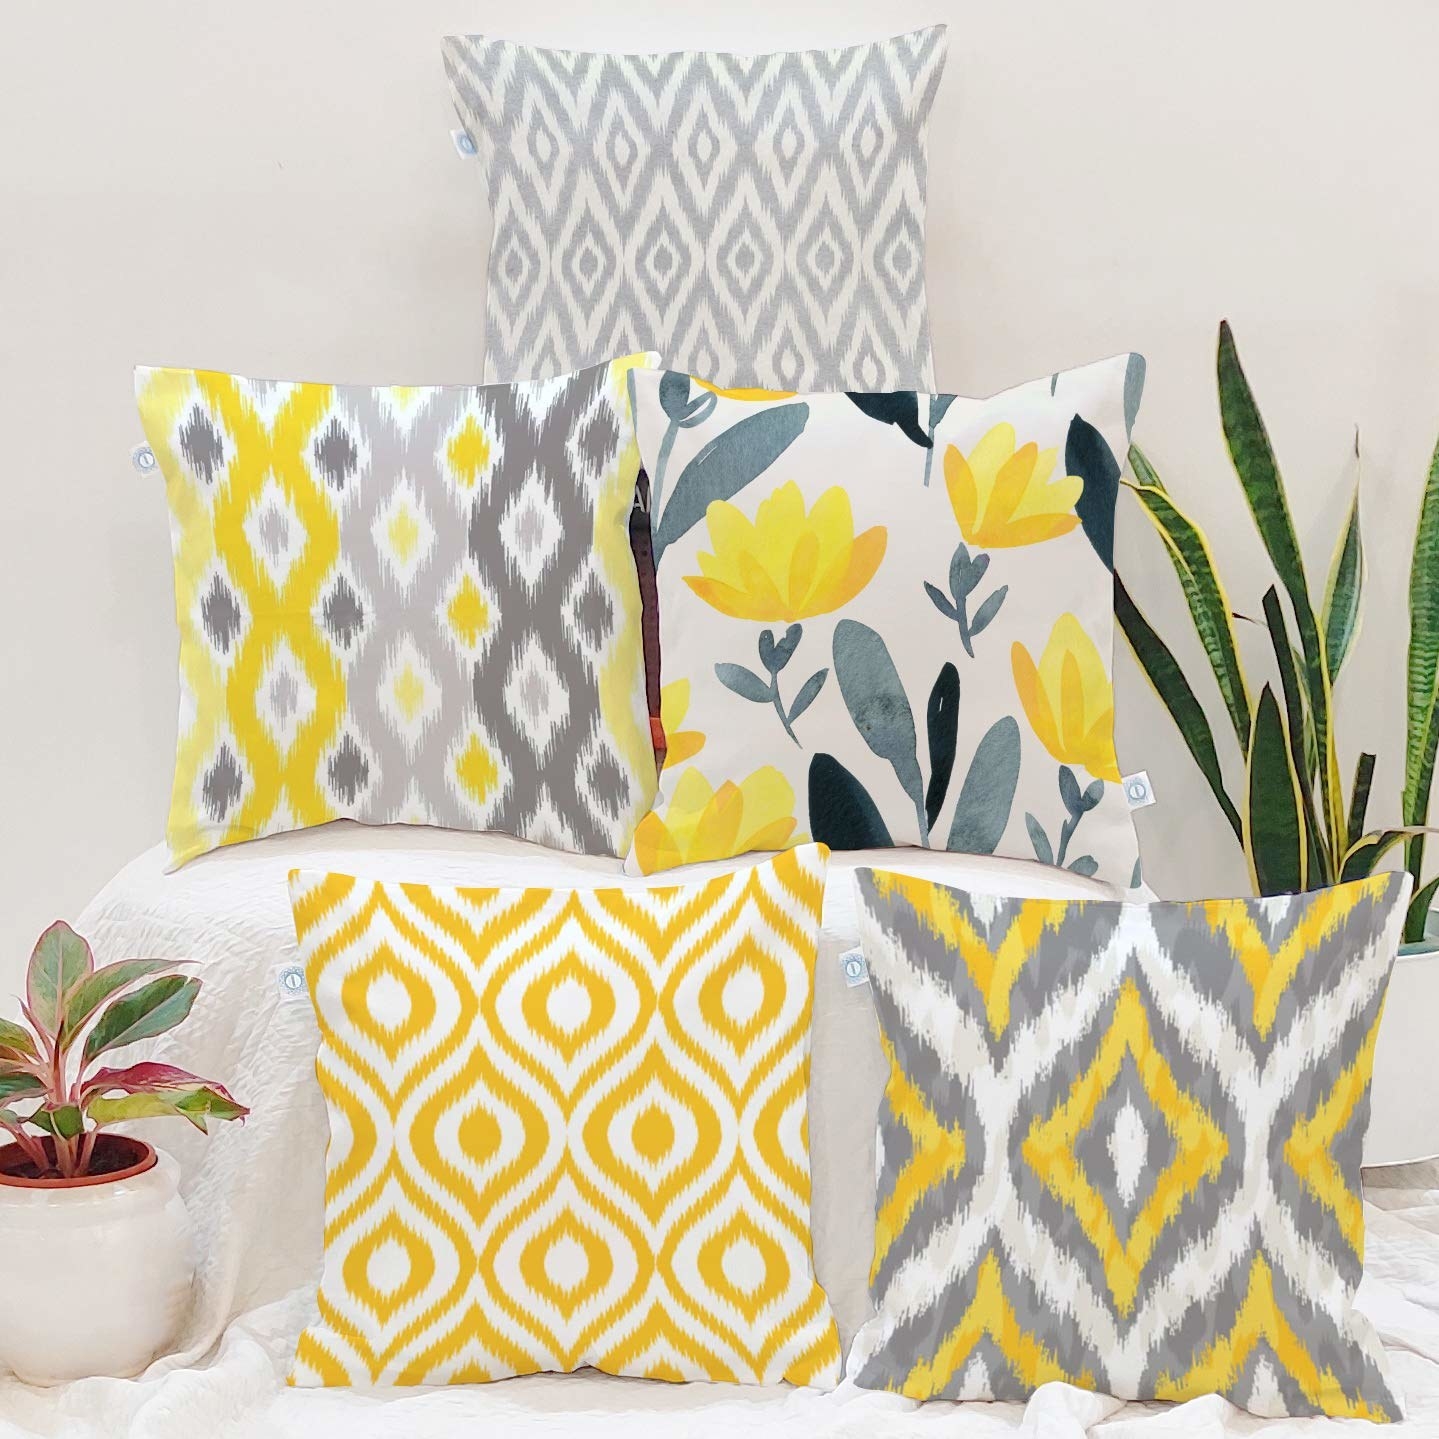 Cushions covers in yellow, white, and grey.